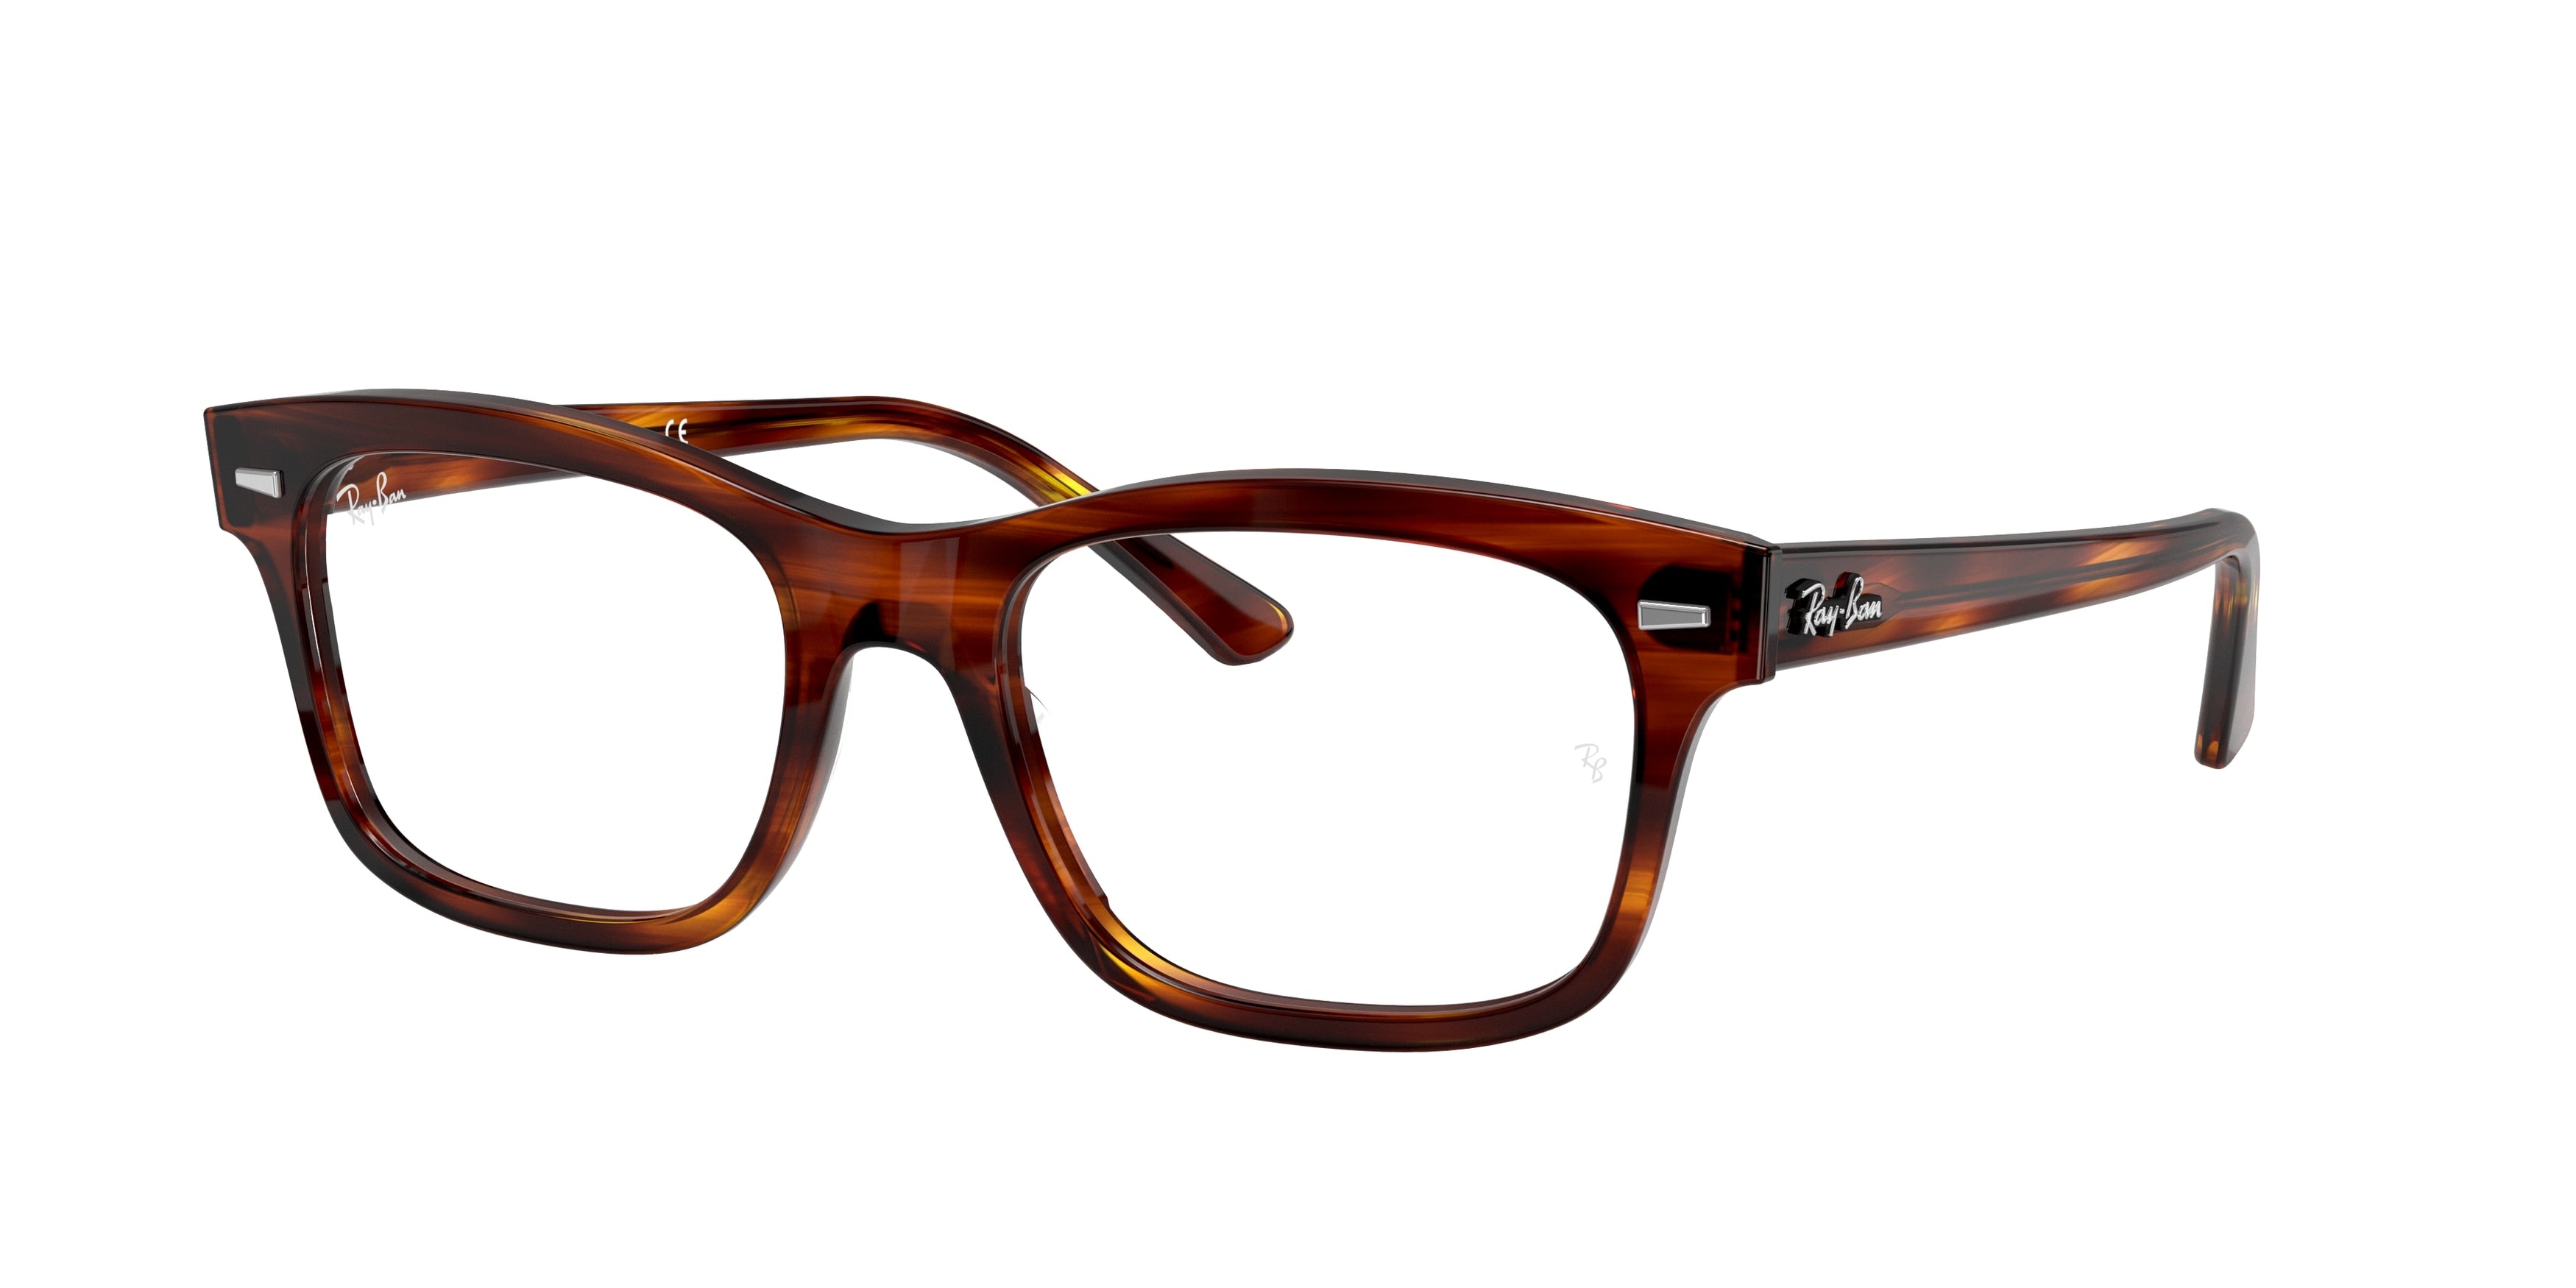 Ray-Ban Optical MR BURBANK RX5383 Rectangle Eyeglasses  2144-Striped Red Havana 54-150-19 - Color Map Red